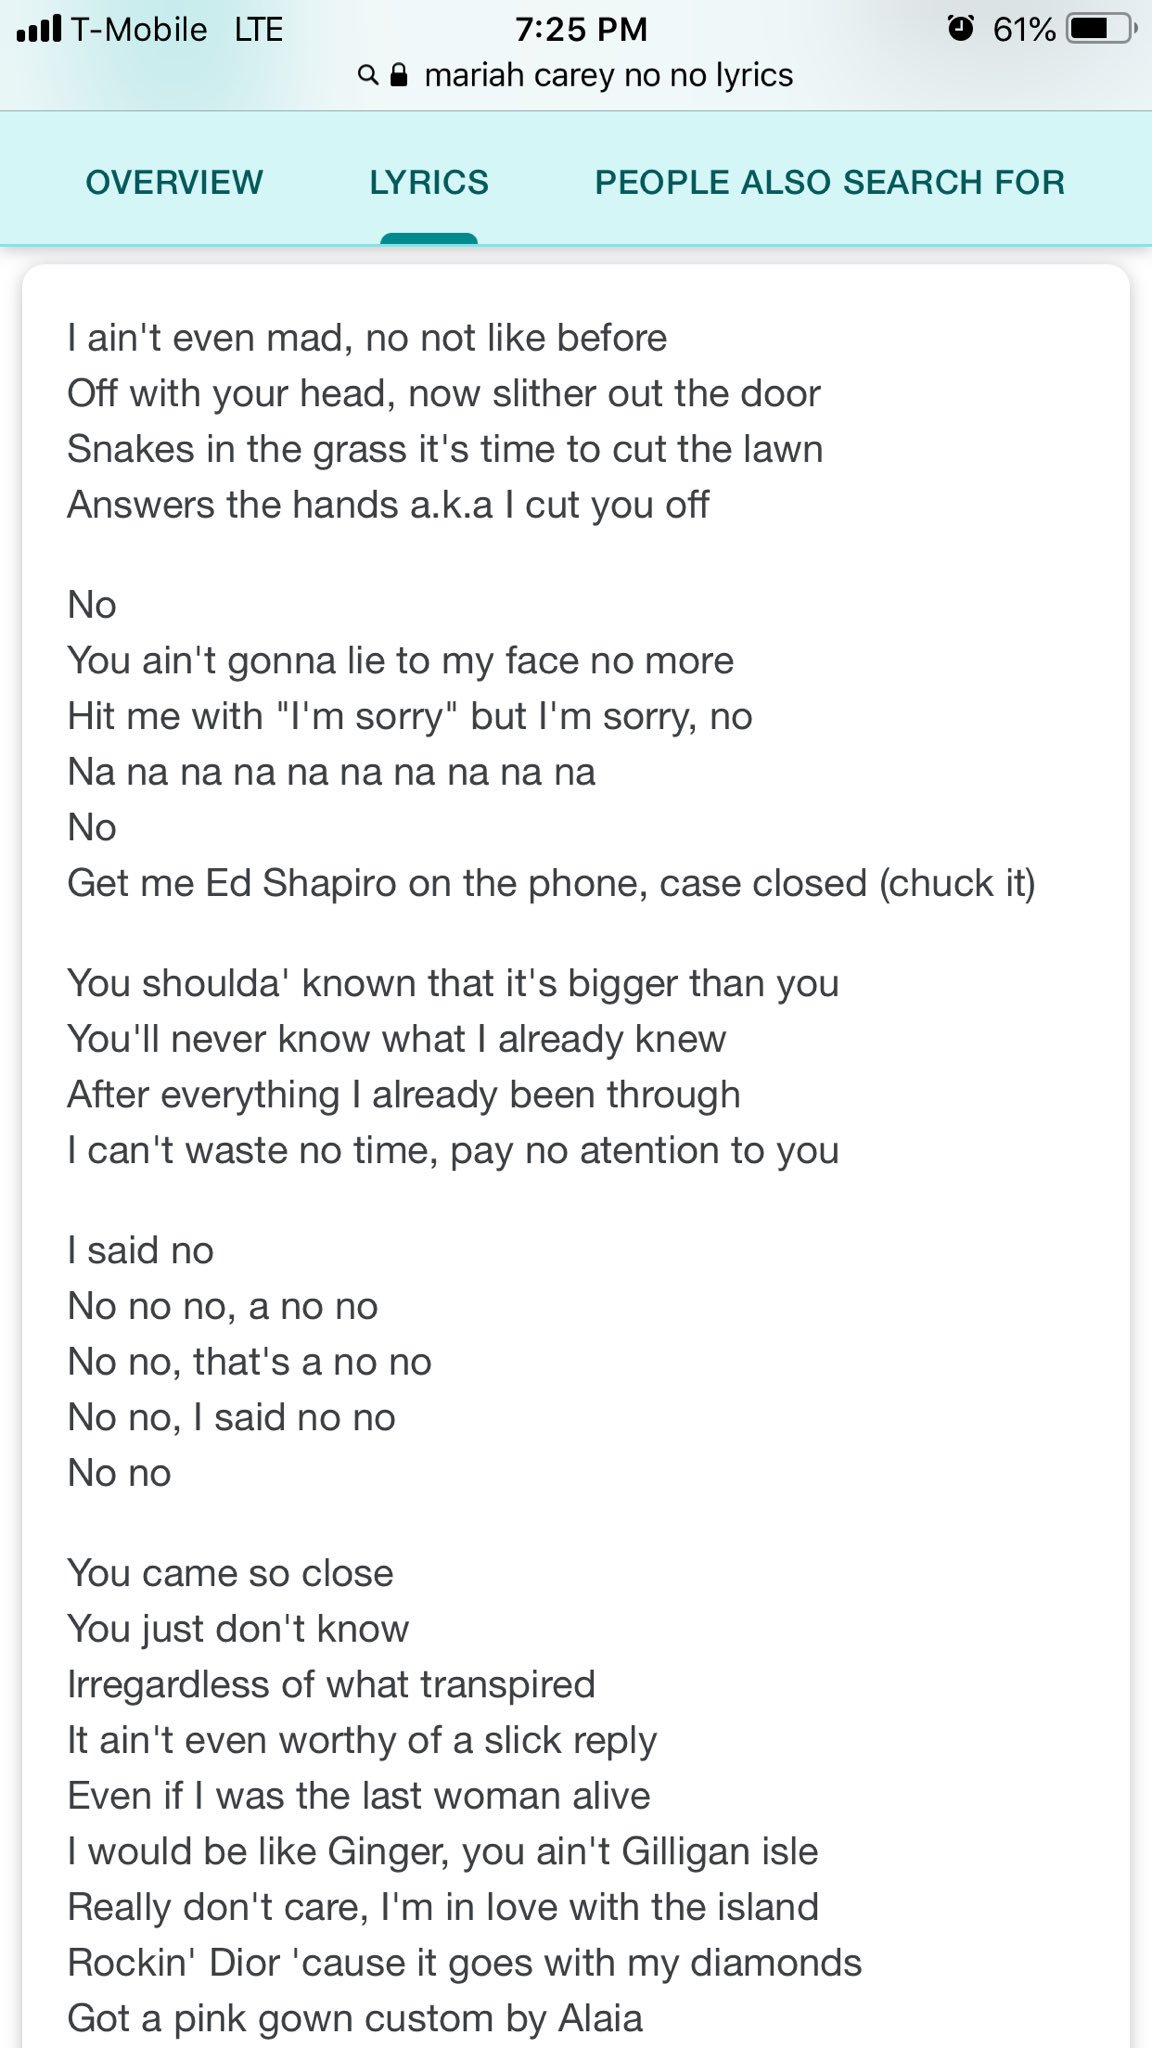 Over It on X: @inzane2112 @mariahgodly @ShannonSharpe Bull shit! Here are  the song lyrics. cult45 are liars just like their grand wizard trump! I'm  positive this song is about her ex-Nick Cannon!